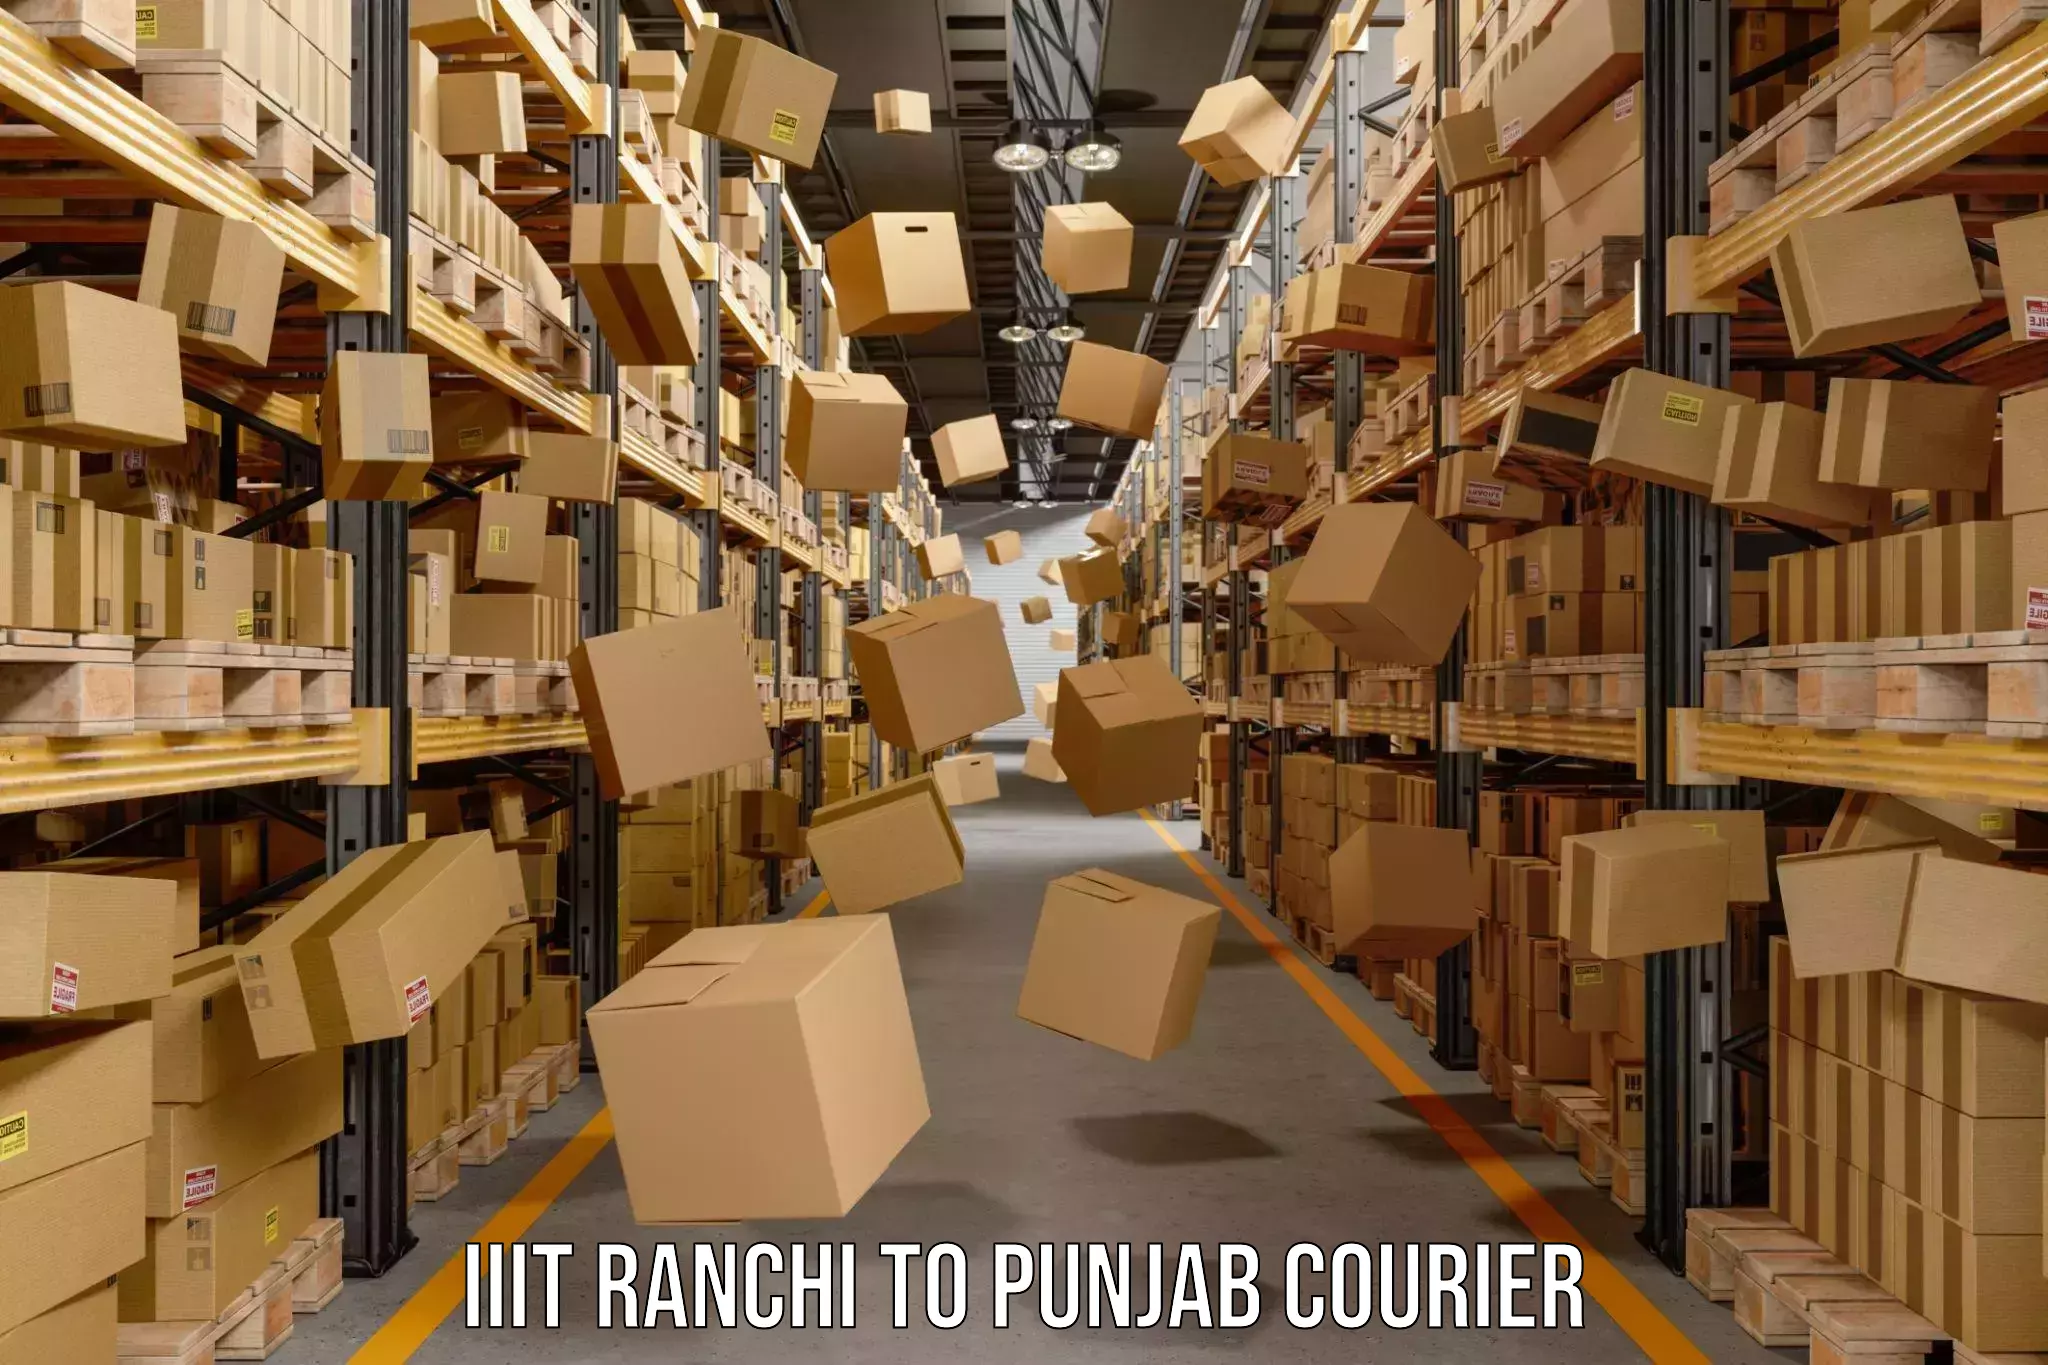 Express package services IIIT Ranchi to Nawanshahr